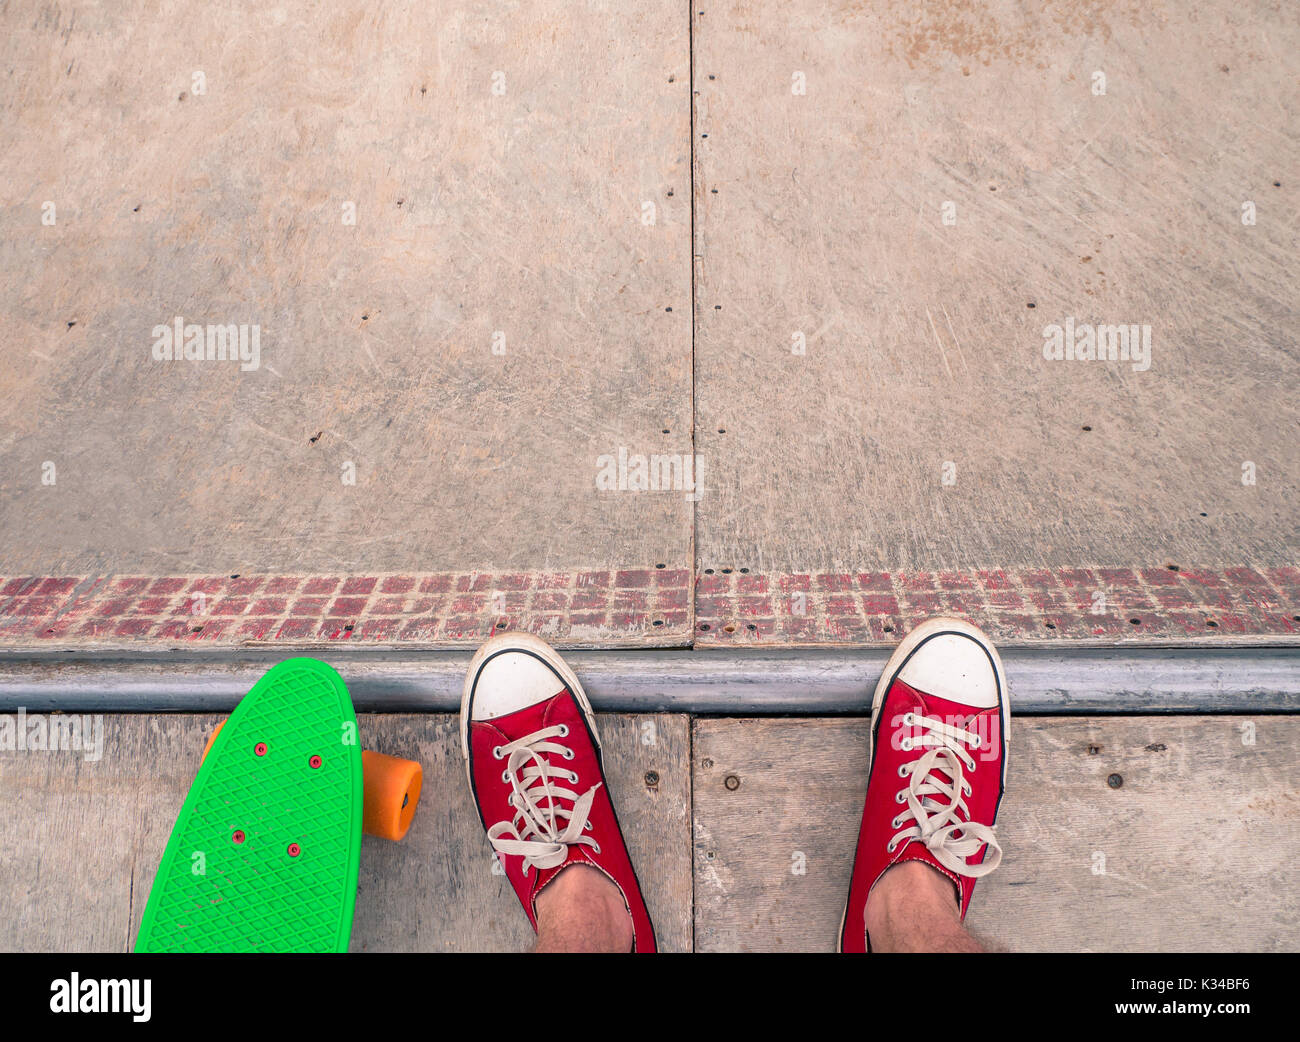 Low section of a male skater in red sneakers with a green penny board on the half-pipe. Stock Photo